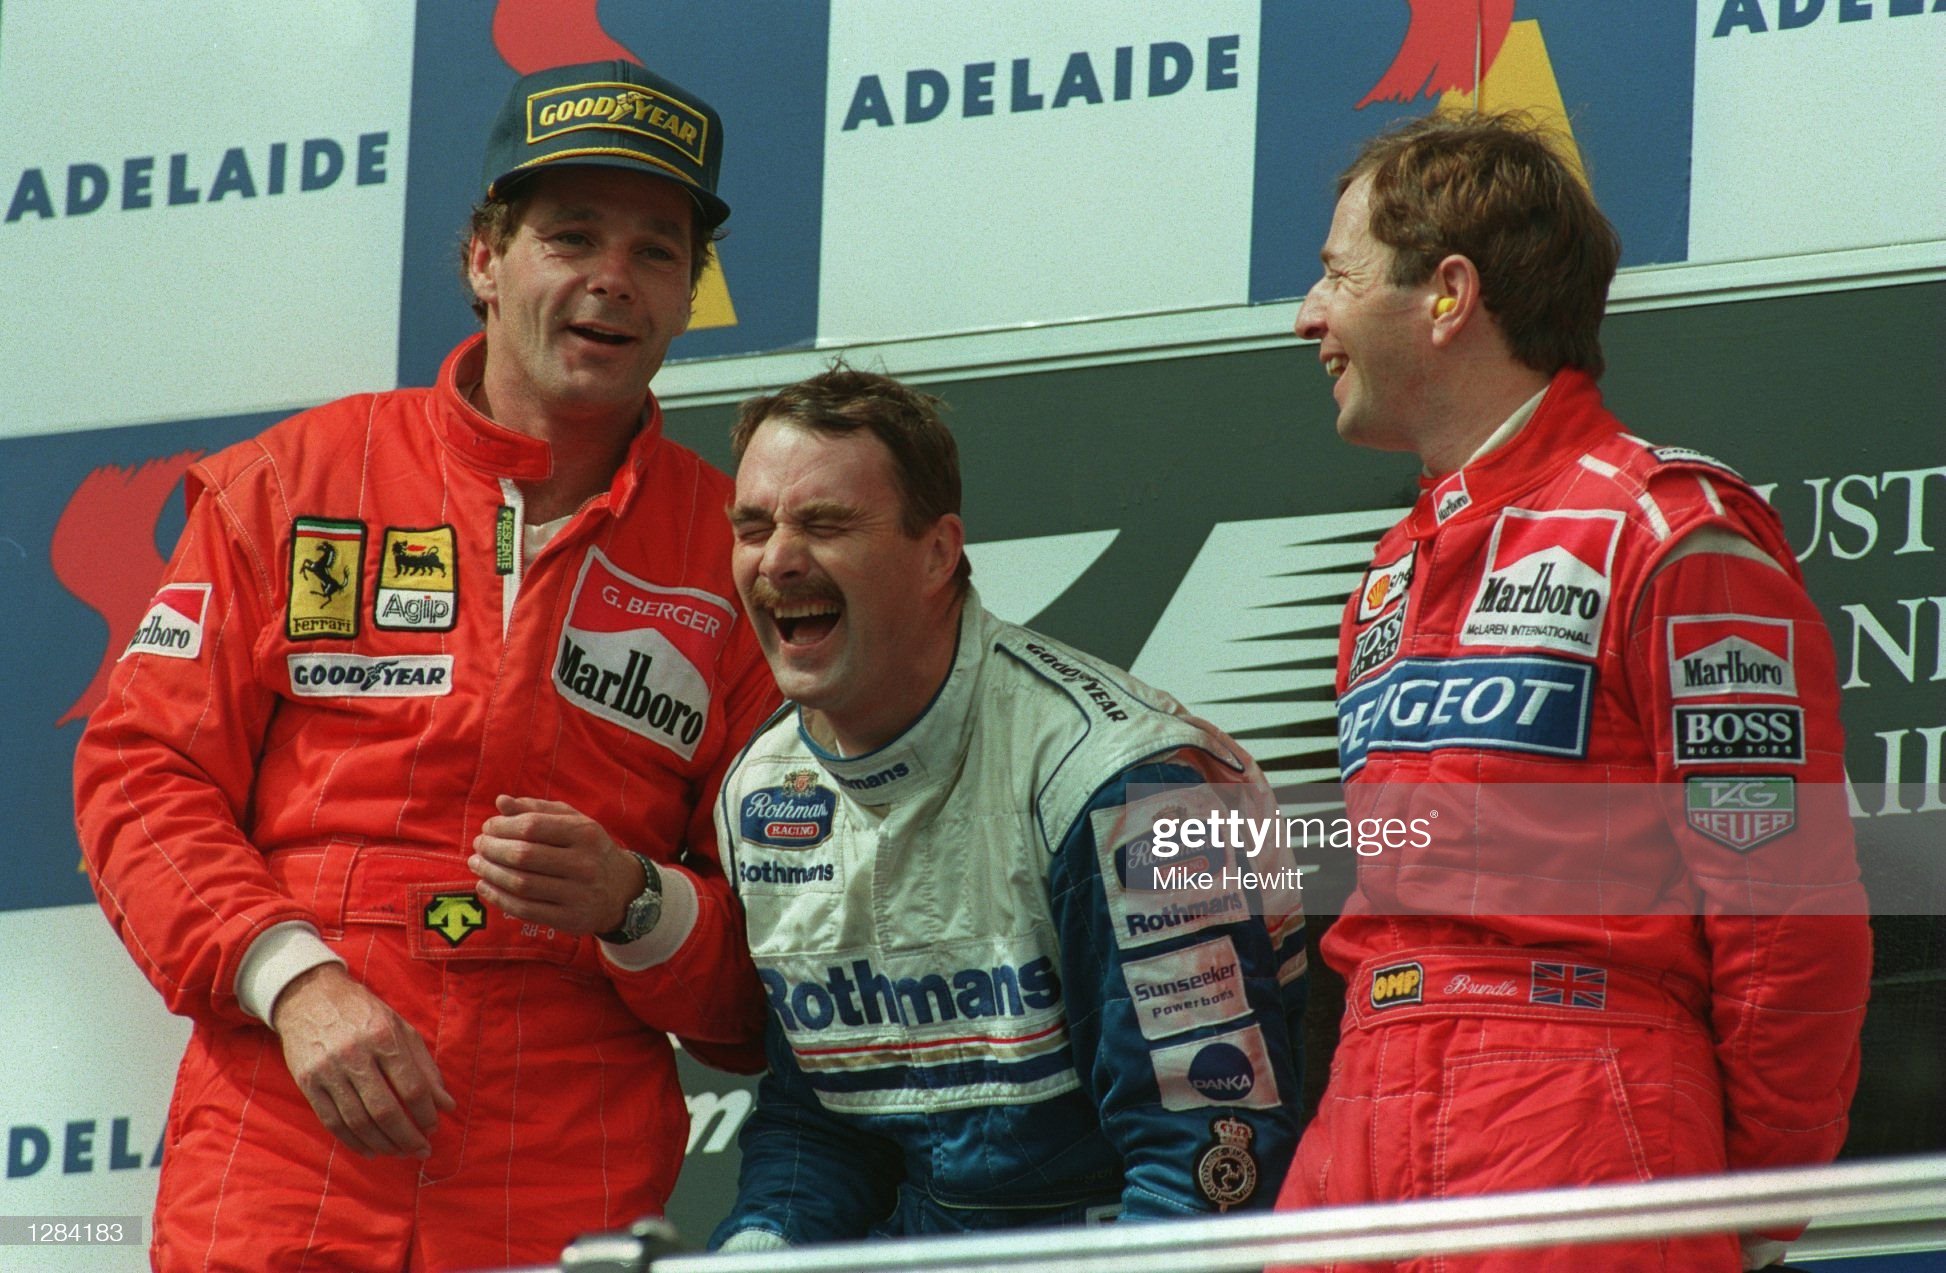 Left to right: second place finisher, Ferrari’s Gerhard Berger, winner, Nigel Mansell and Martin Brundle, the third place finisher, share a joke on the podium after the Australian Grand Prix in Adelaide on 13 November 1994. Credit: Mike Hewitt / Allsport.